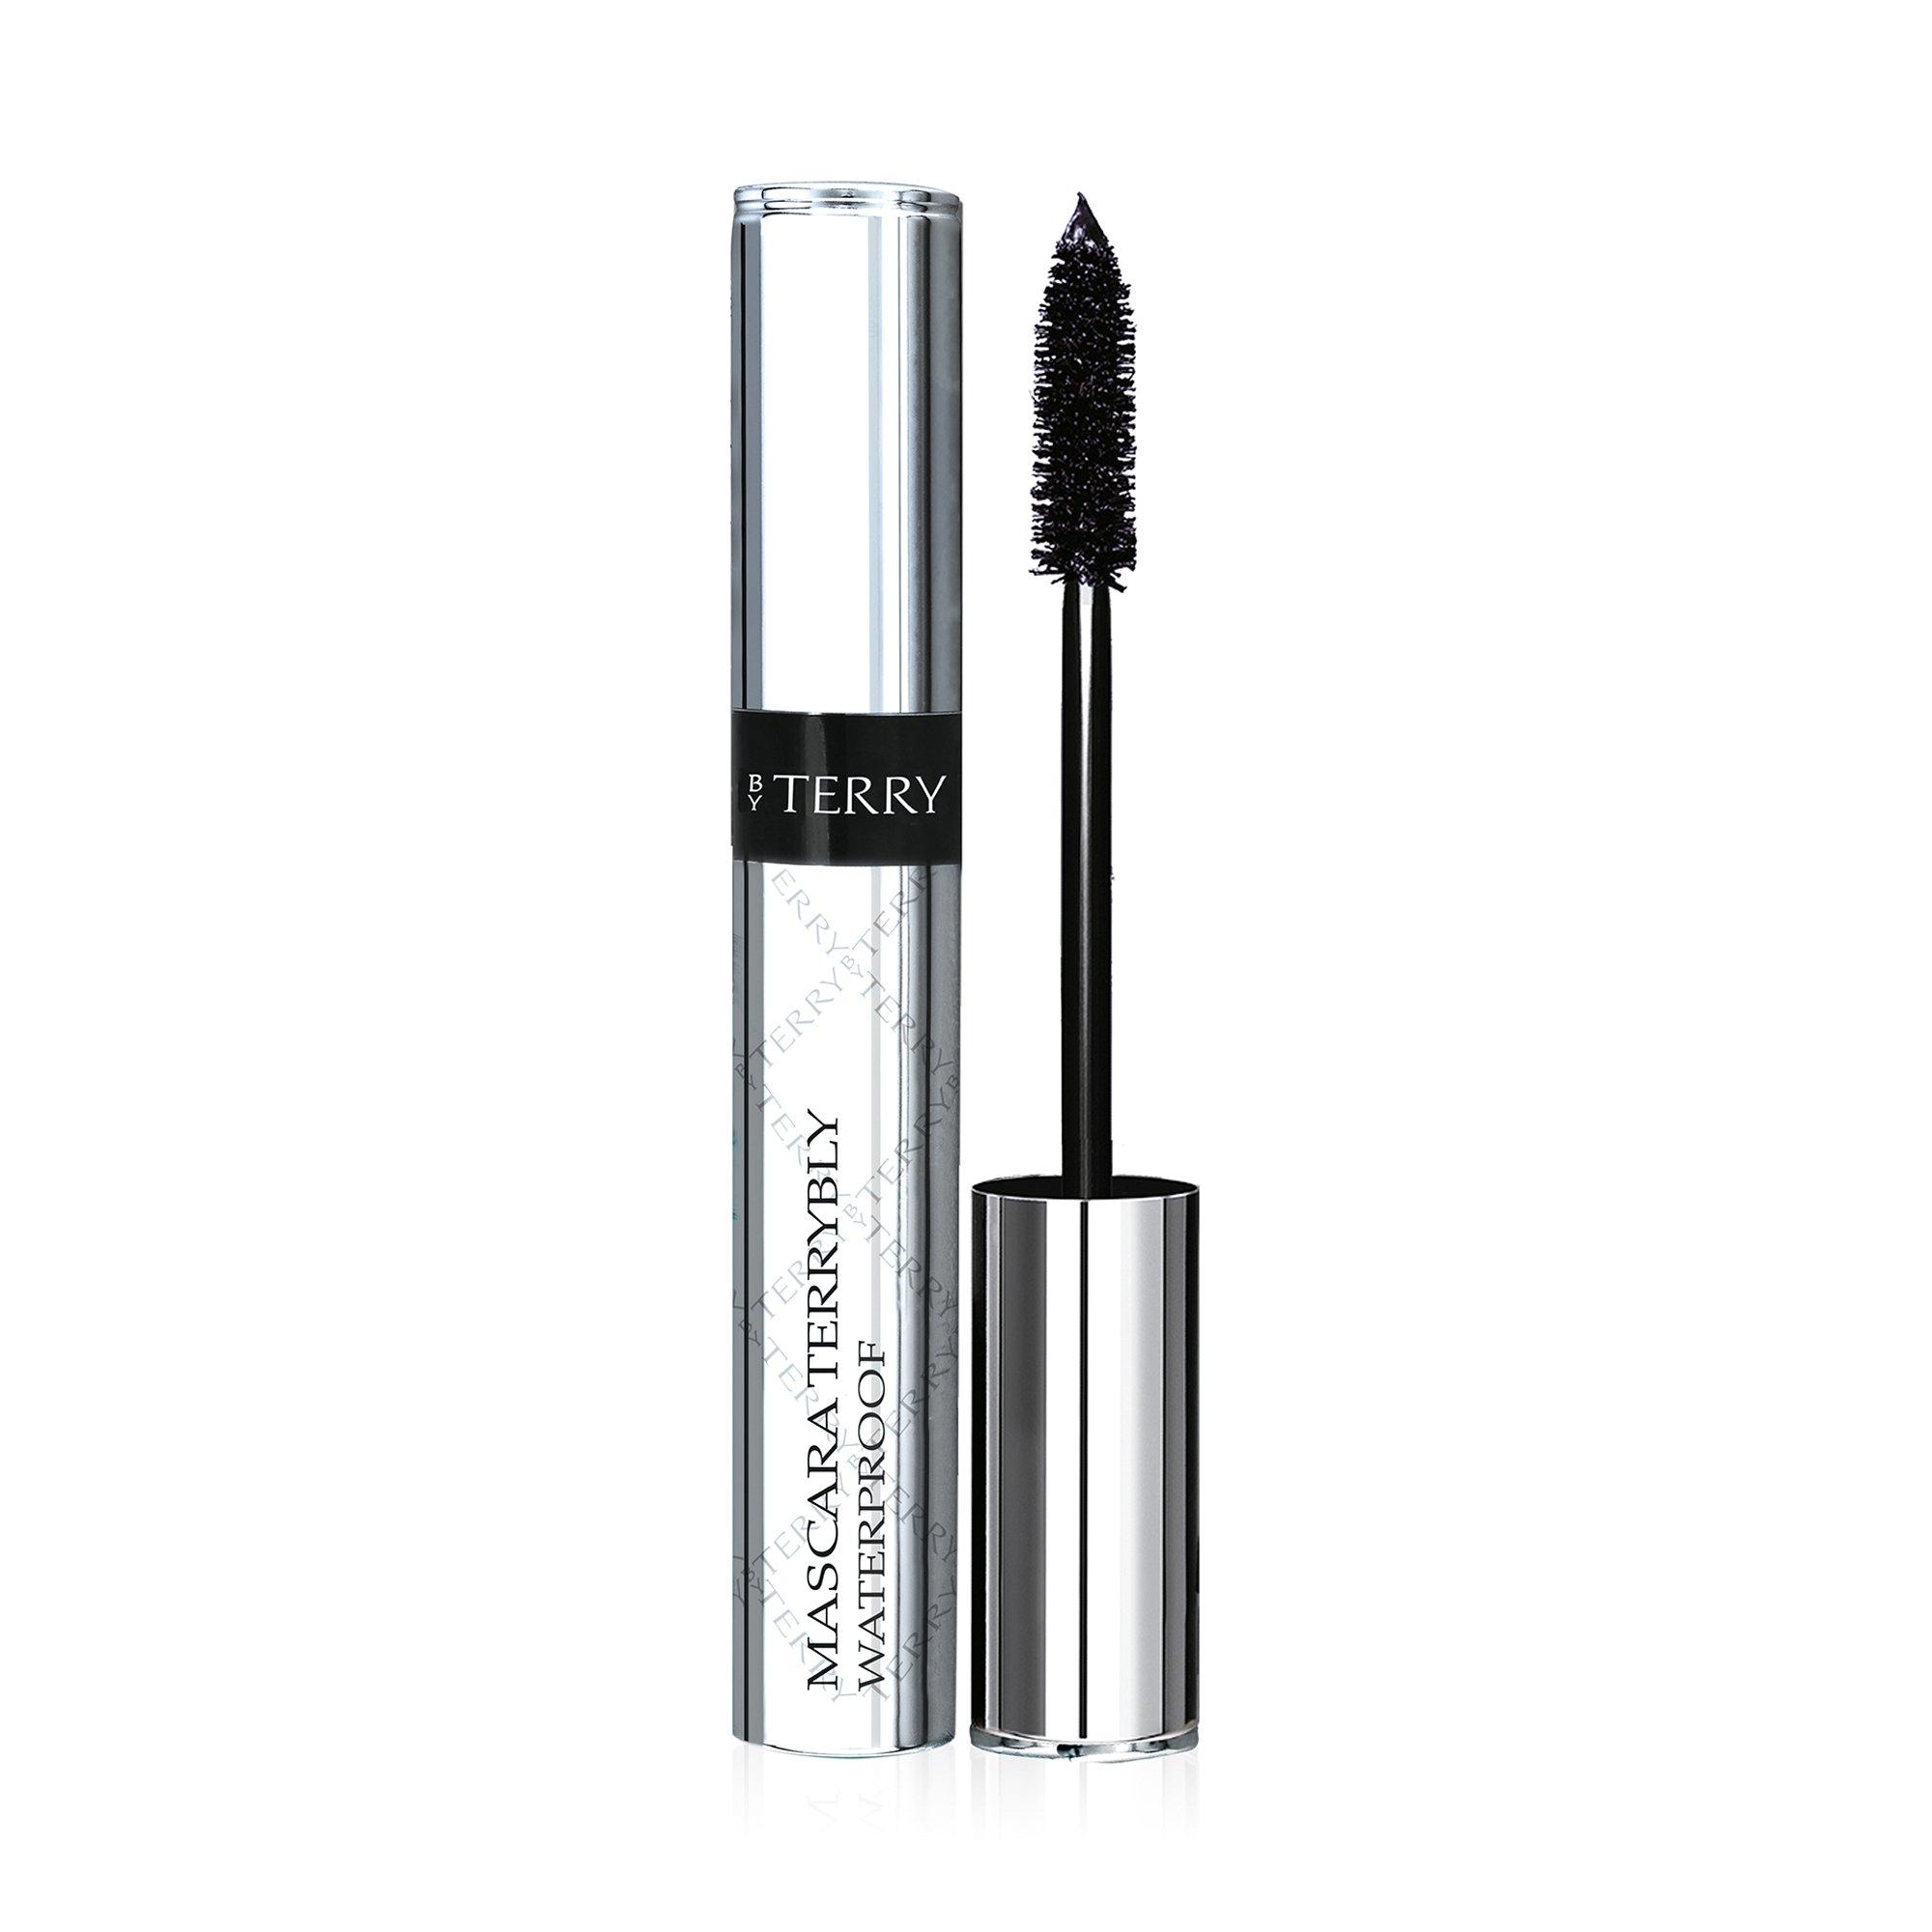 BY TERRY TERRYBLY Mascara Terrybly Waterproof 